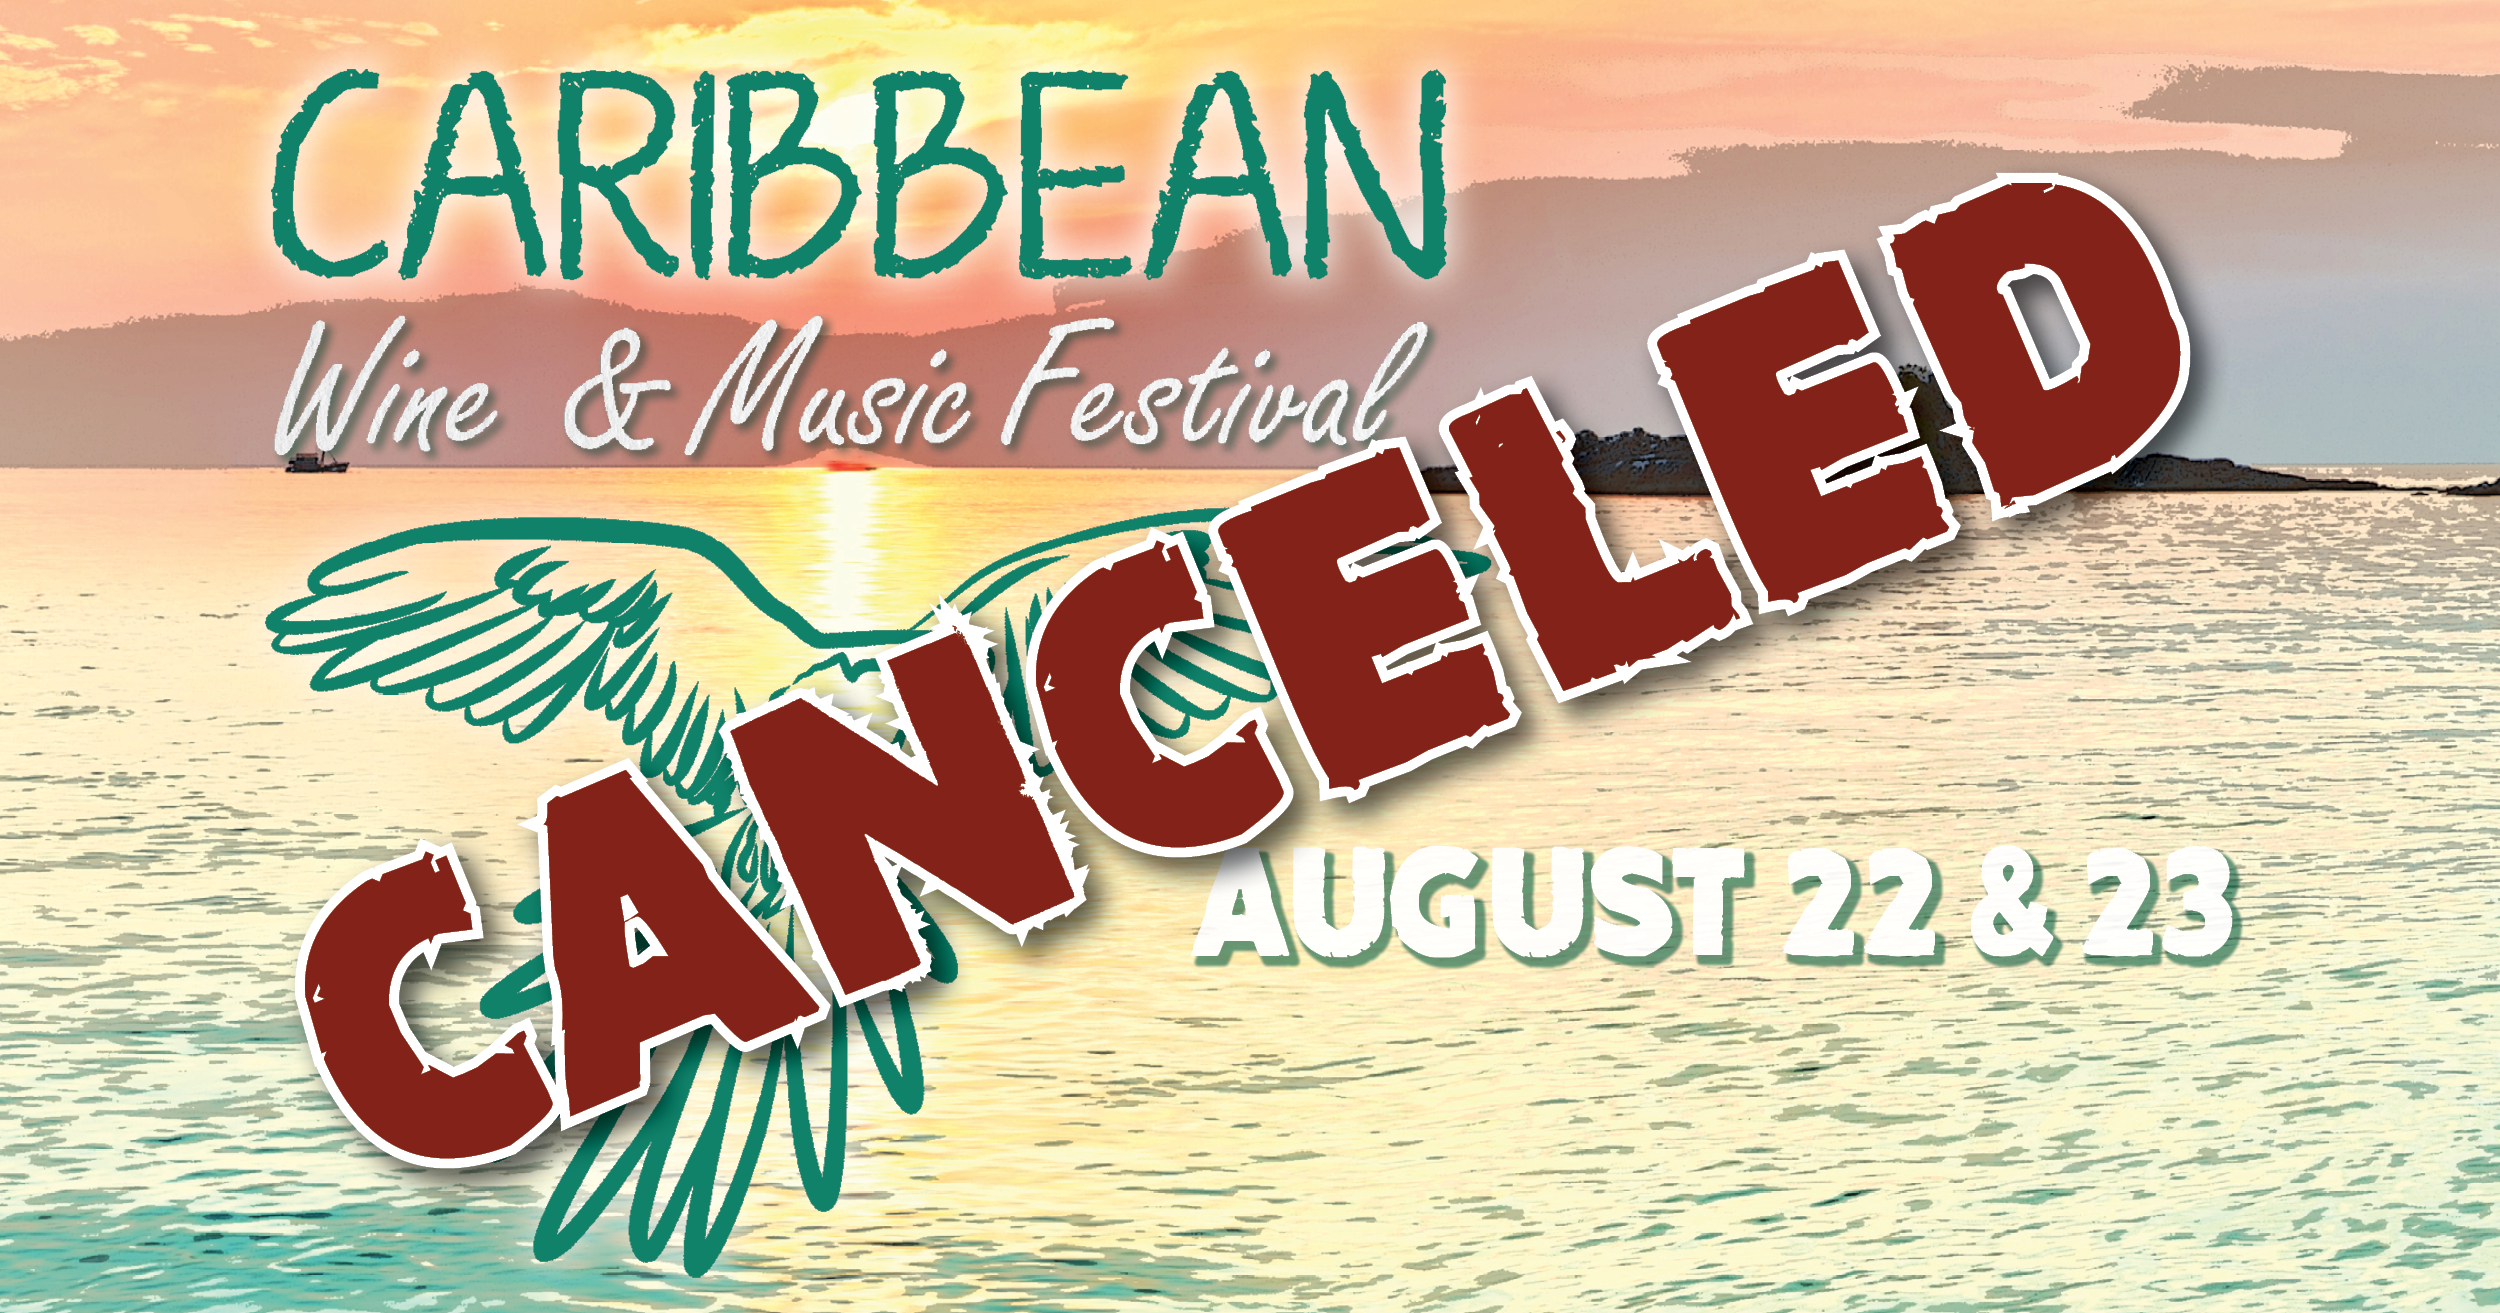 cancelled Caribbean wine and music festival